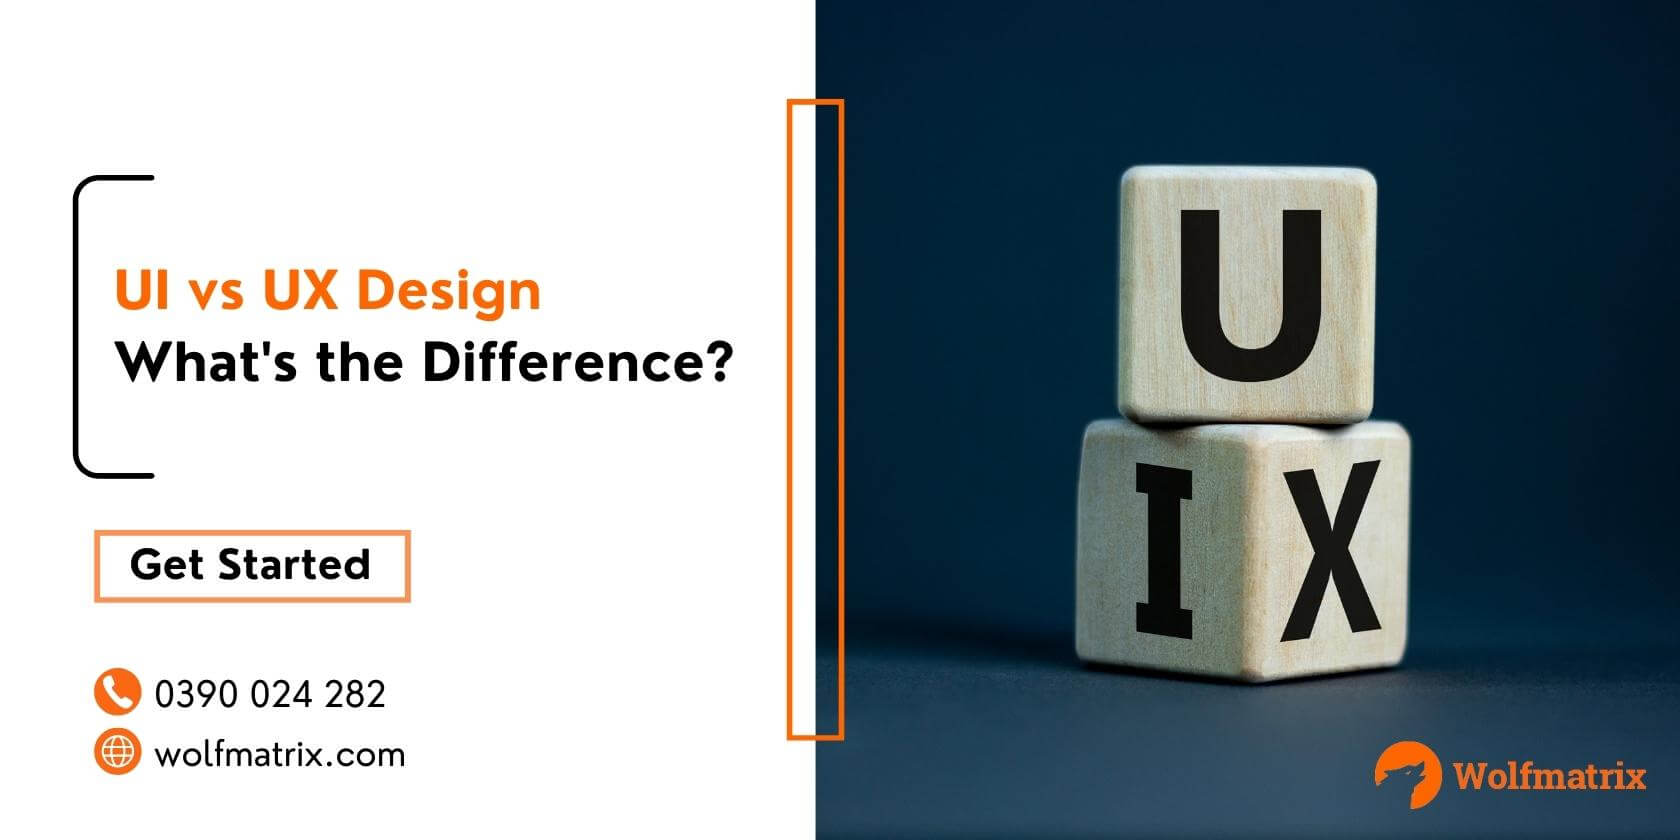 UI vs UX Design- What’s the Difference?